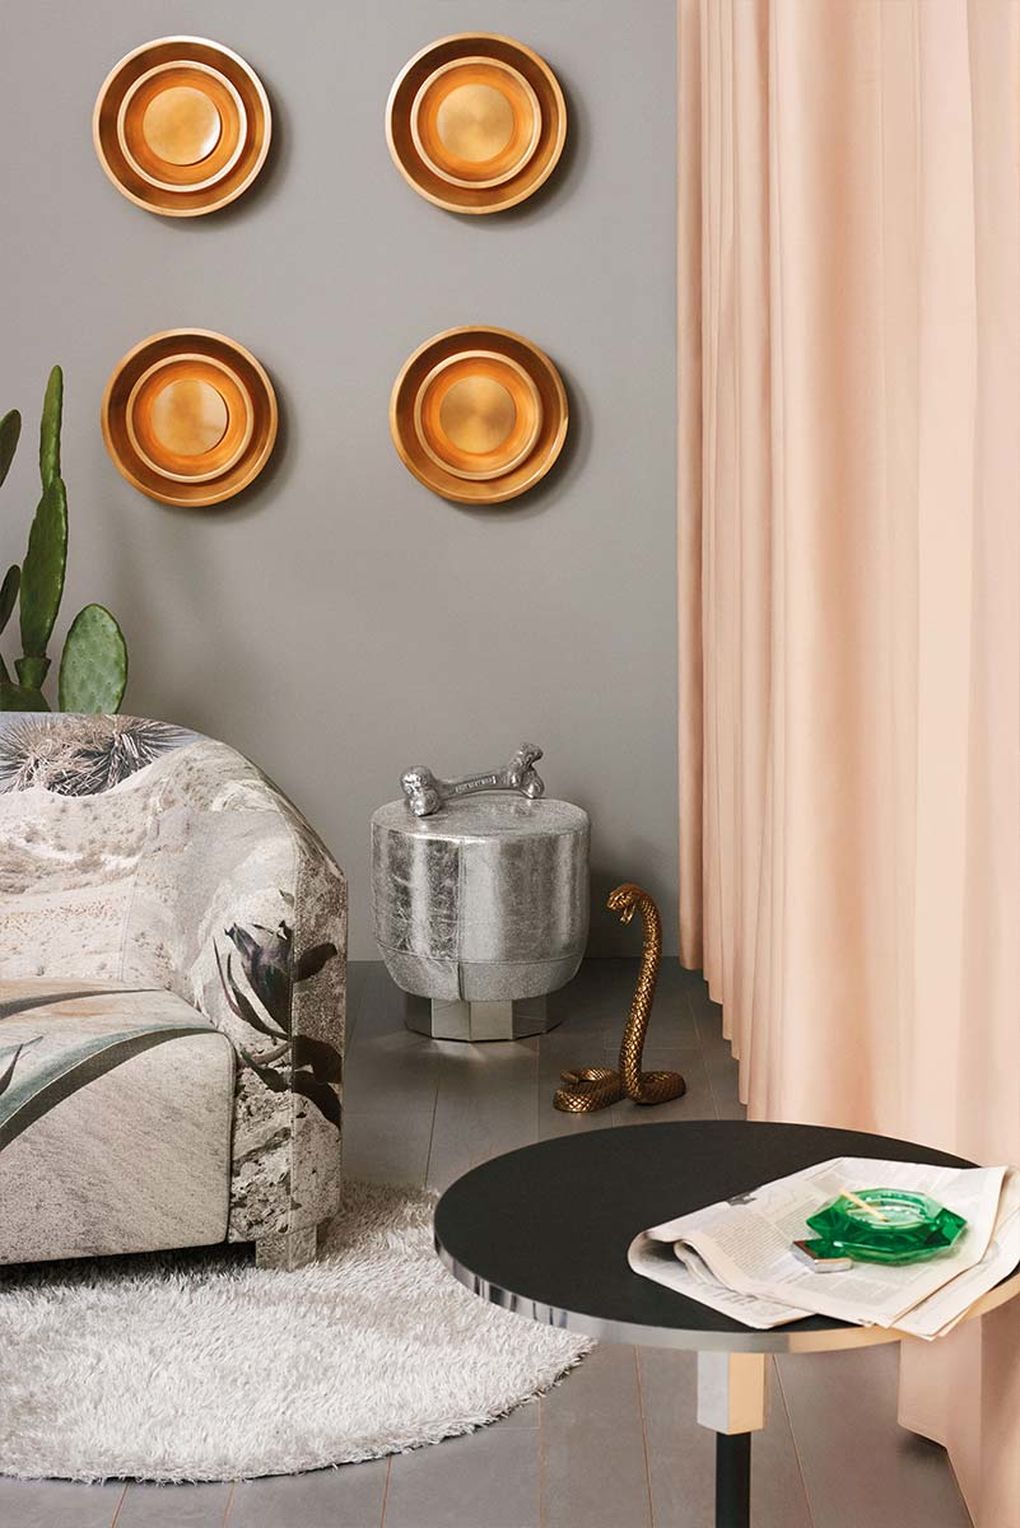 Diesel Living Launches a New Collection Based on 70’s Modernist Design | You can visit us at our website, www.essentialhome.eu and check our Pinterest @midcenturyblog to get more #MidCenturyModern inspiration.